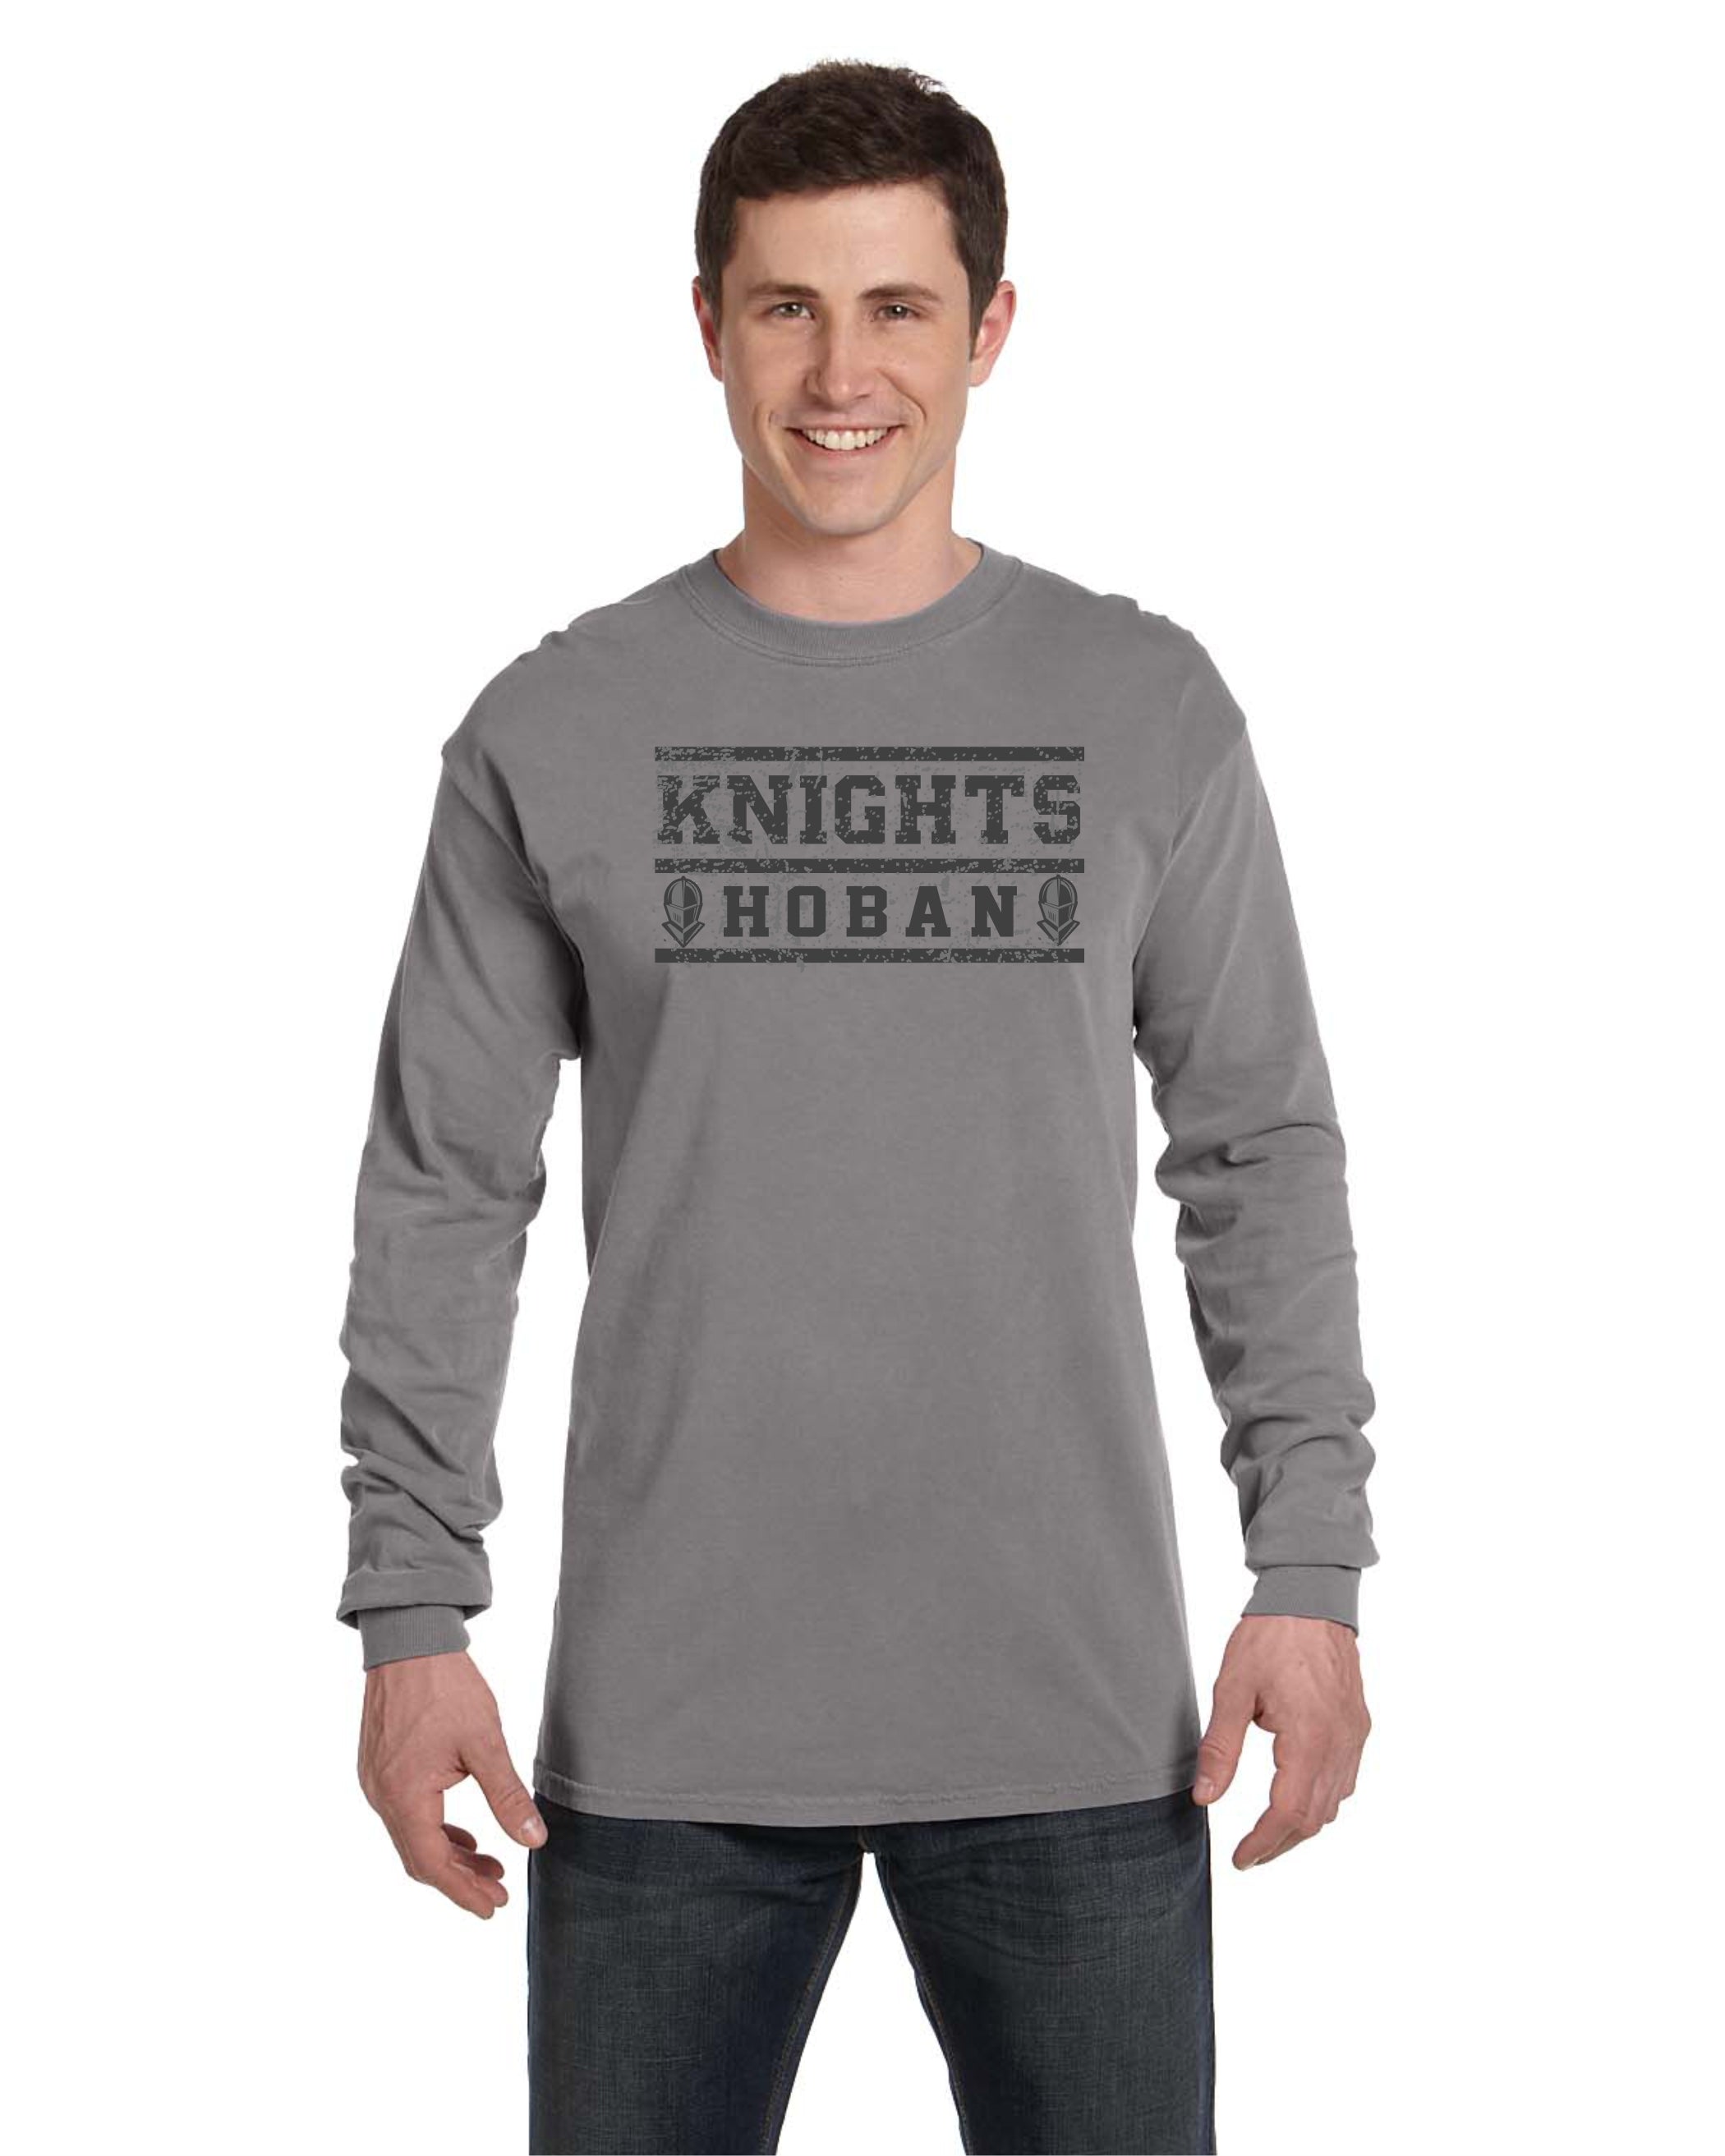 Long Sleeve T Shirt by Comfort Colors (click for more color options)